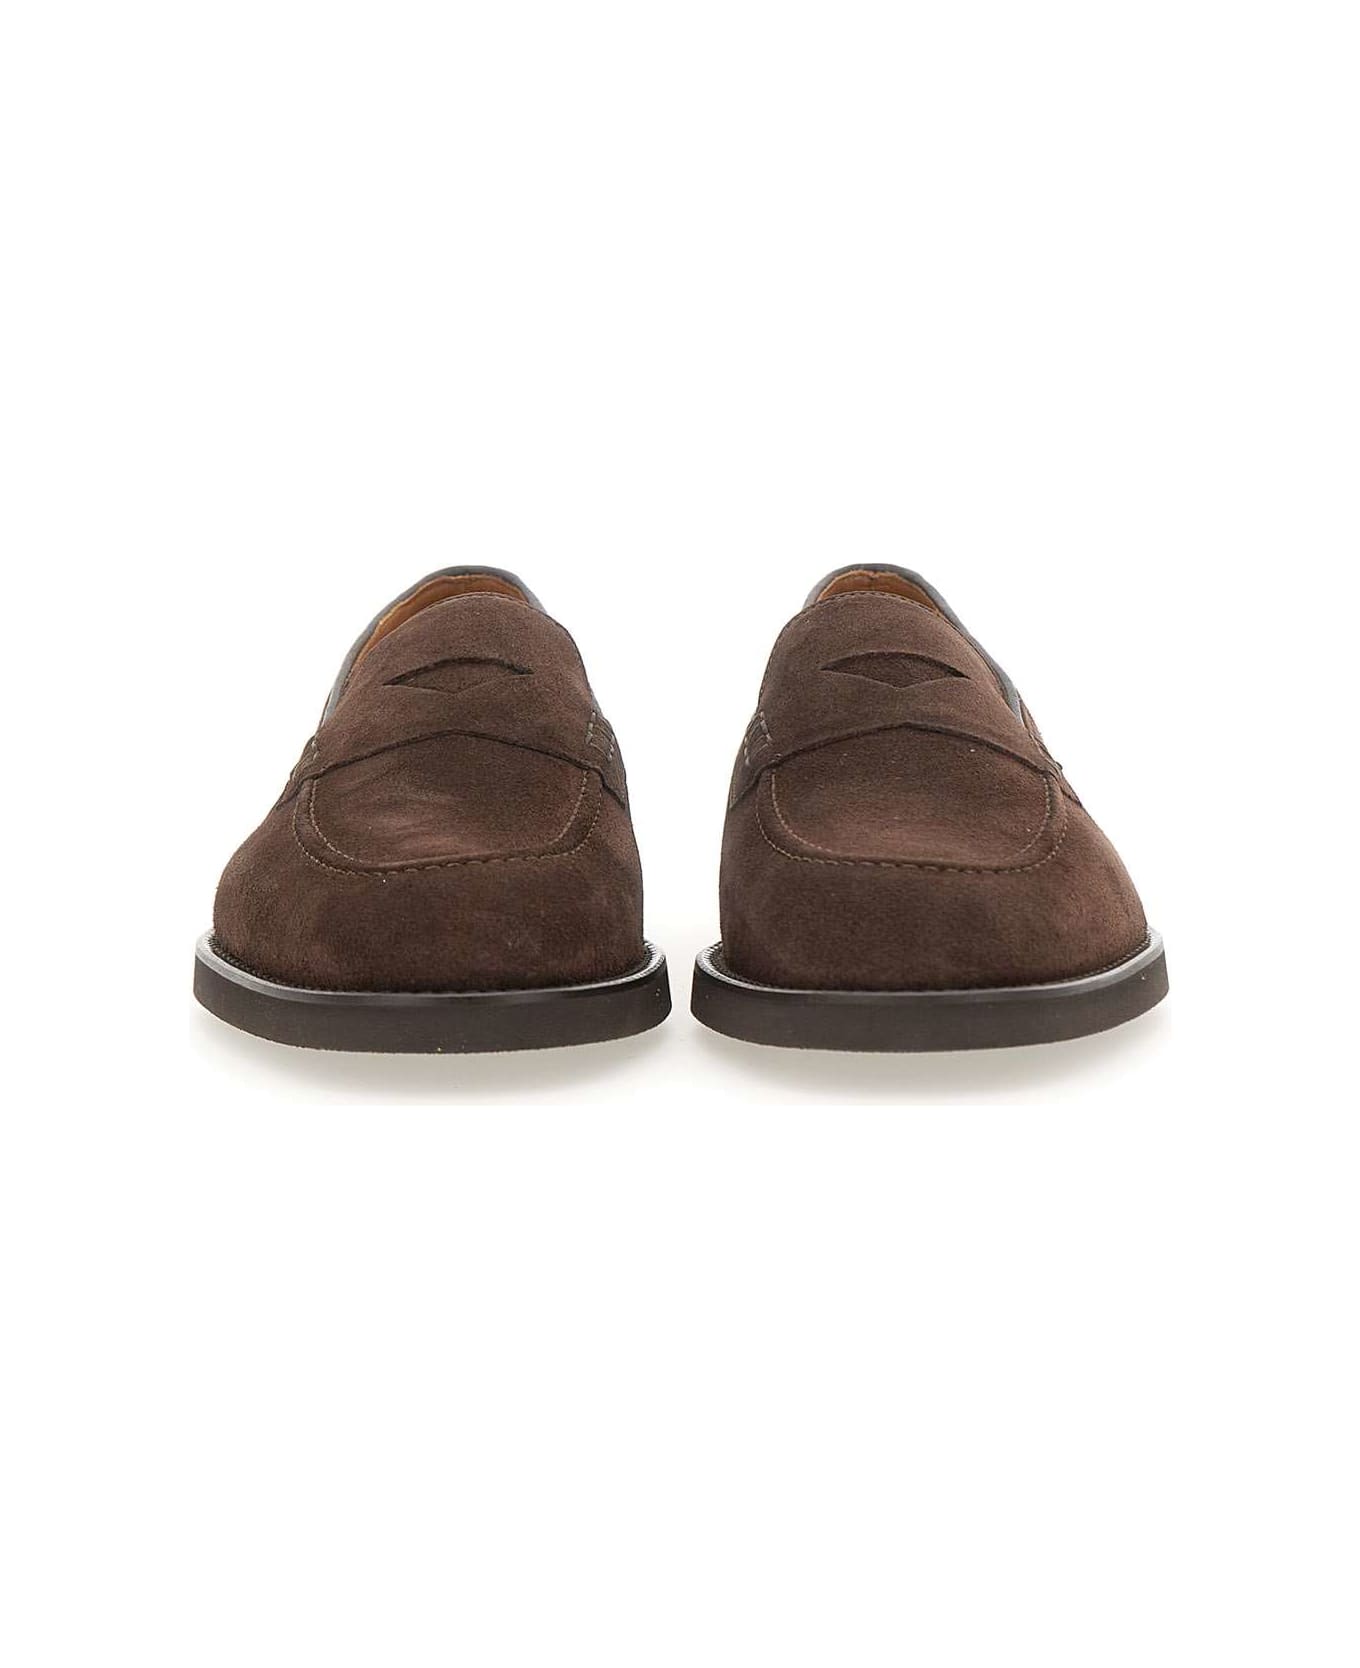 Doucal's "wash" Suede Moccasins - BROWN